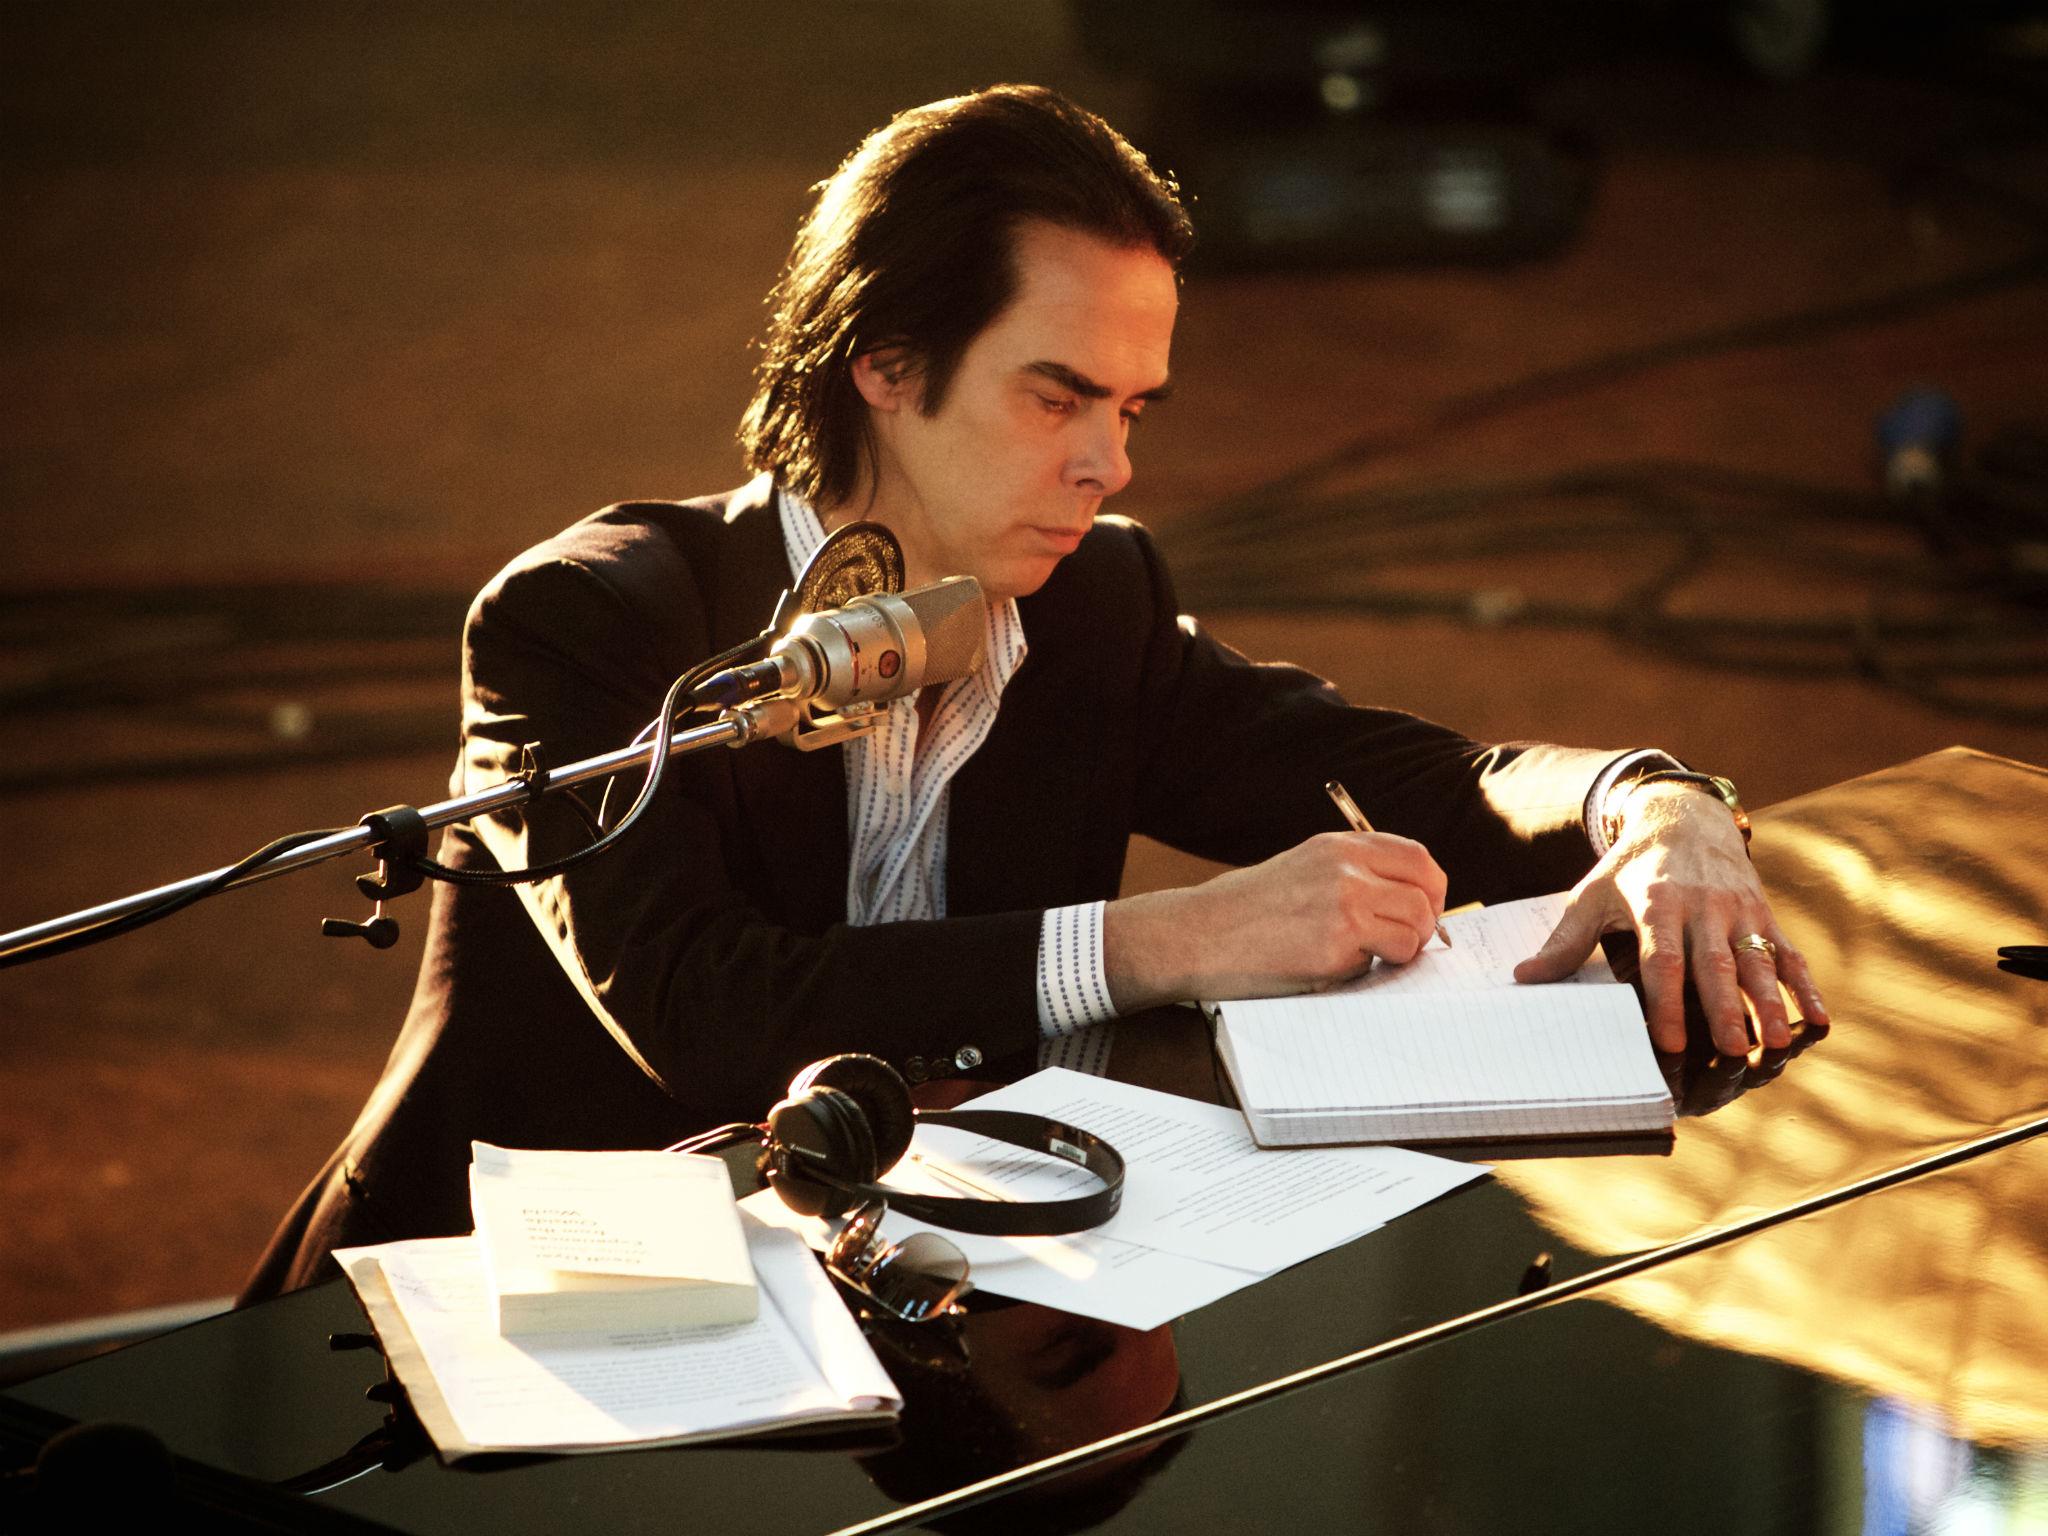 Nick Cave writing songs at the piano in his documentary film ‘One More Time With Feeling’